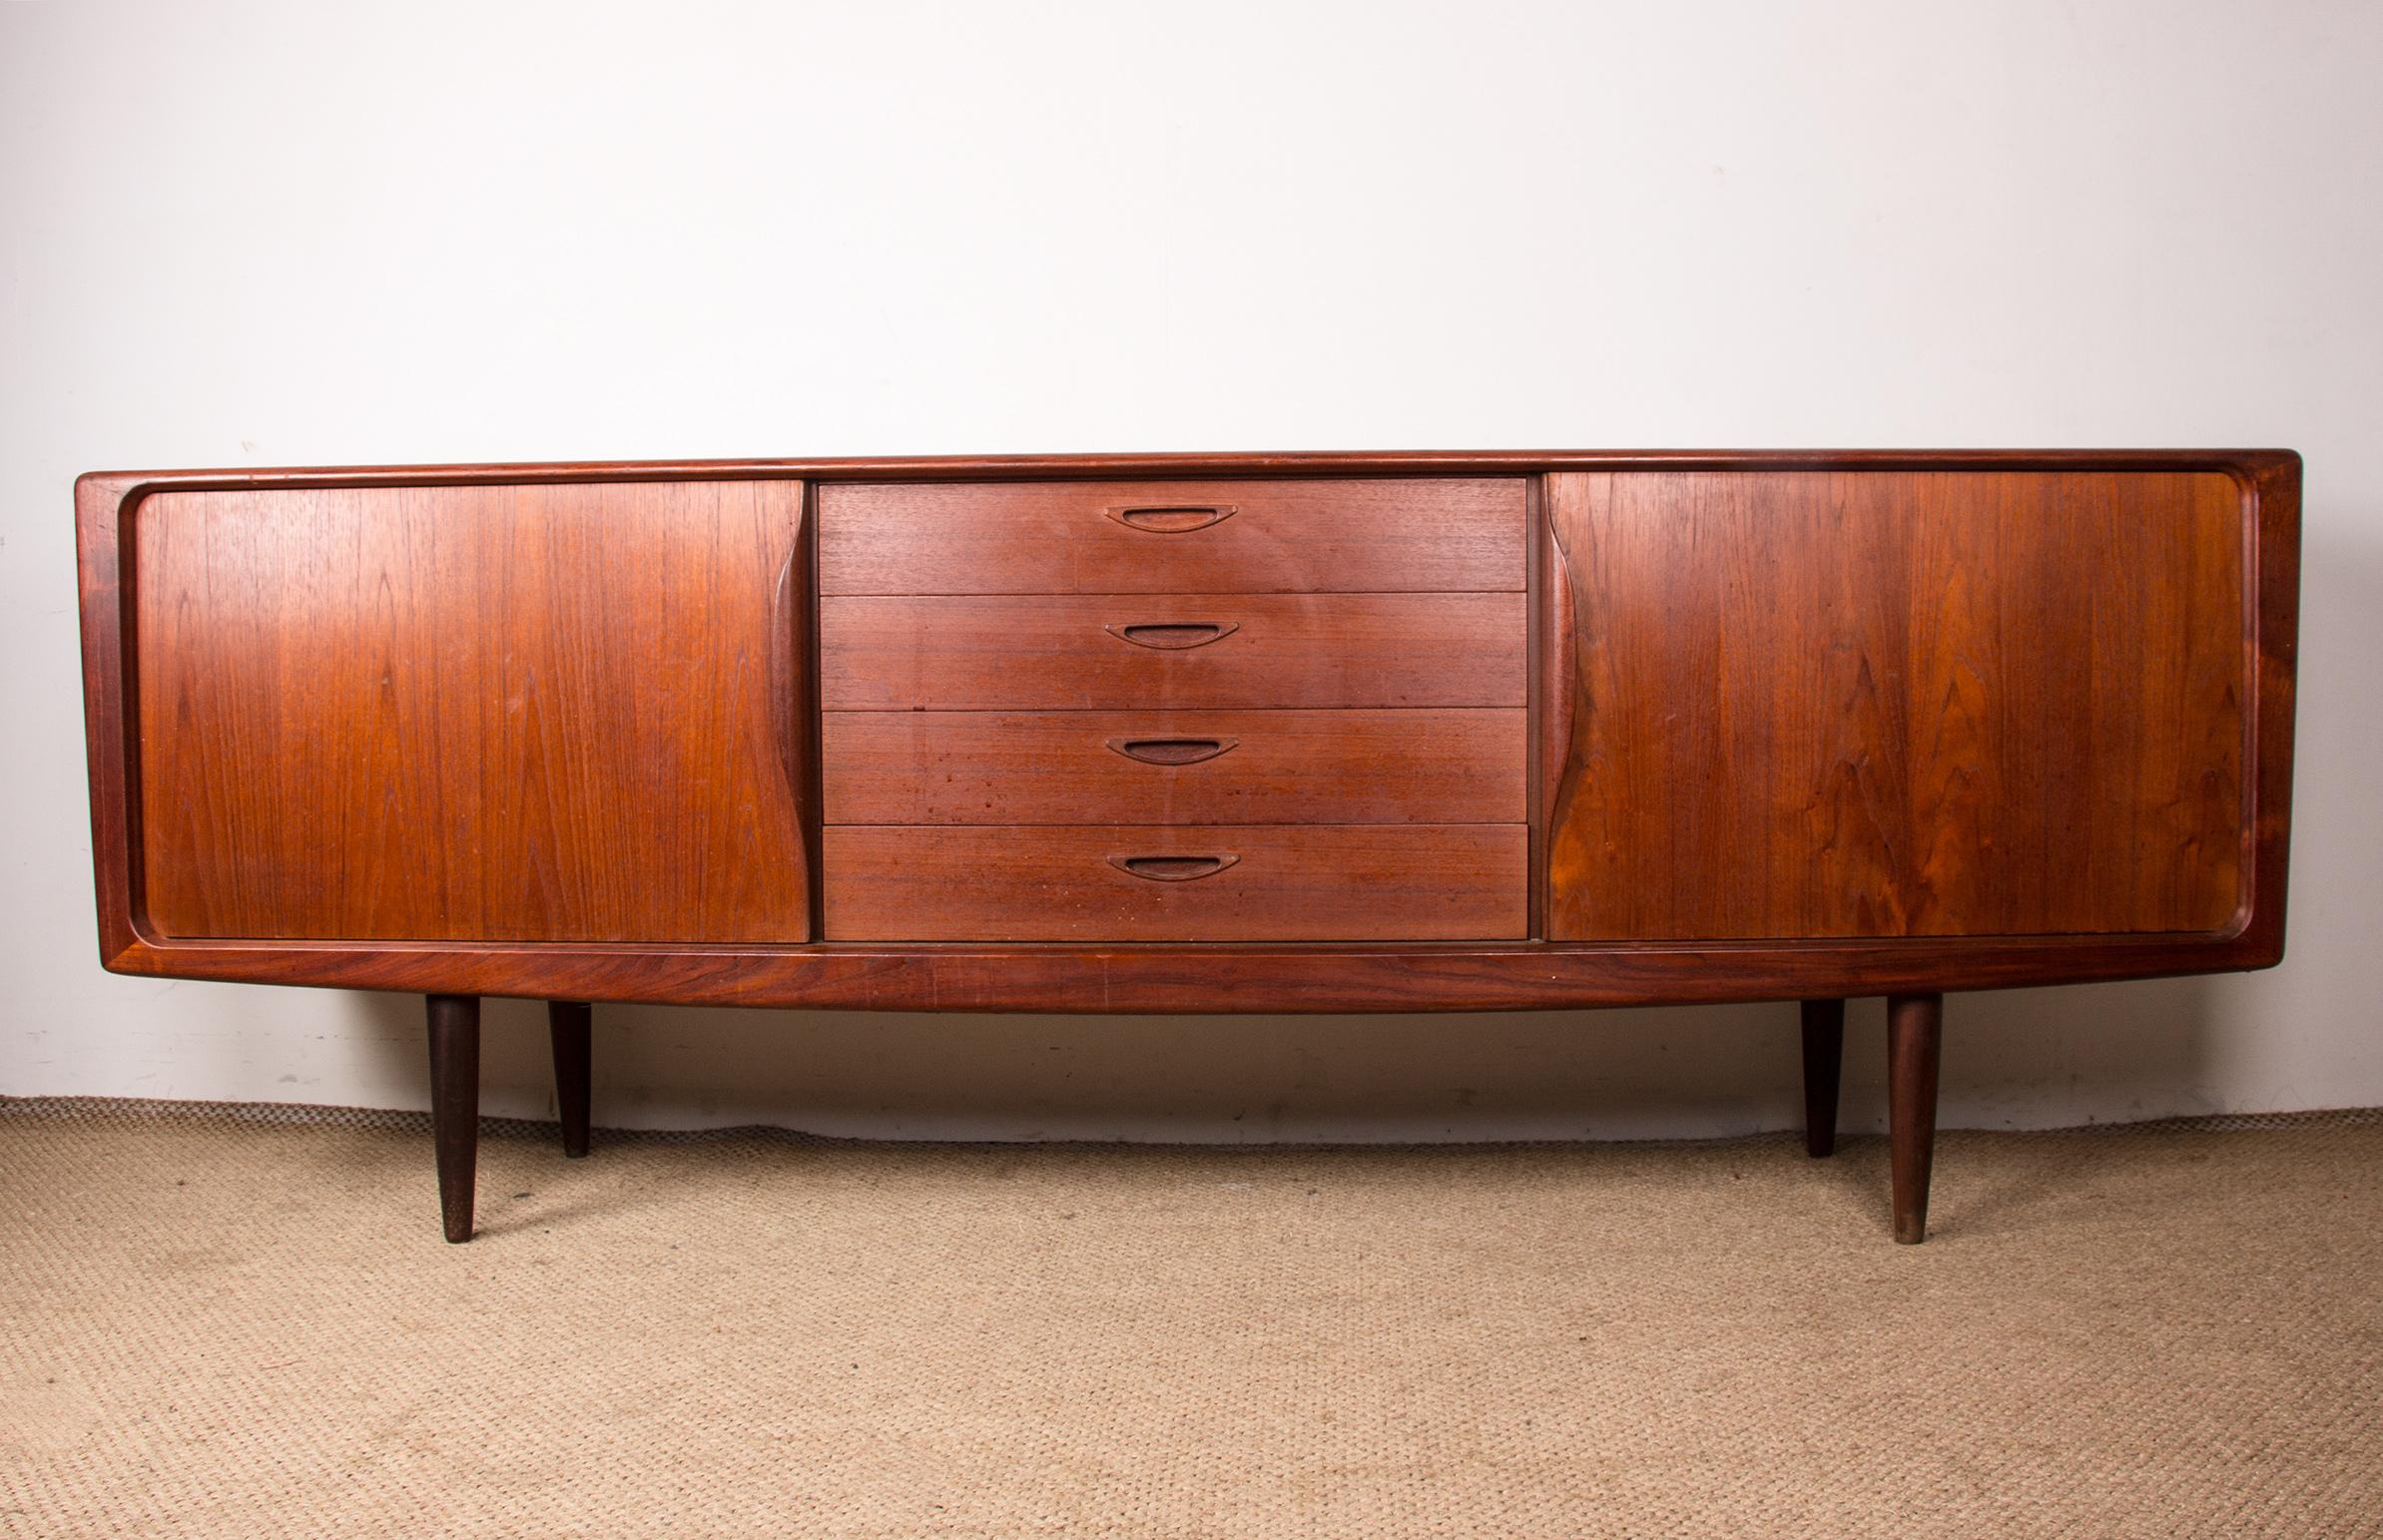 Mid-20th Century Danish Teak Sideboard by Henry Walter Klein for Bramin 1960. For Sale